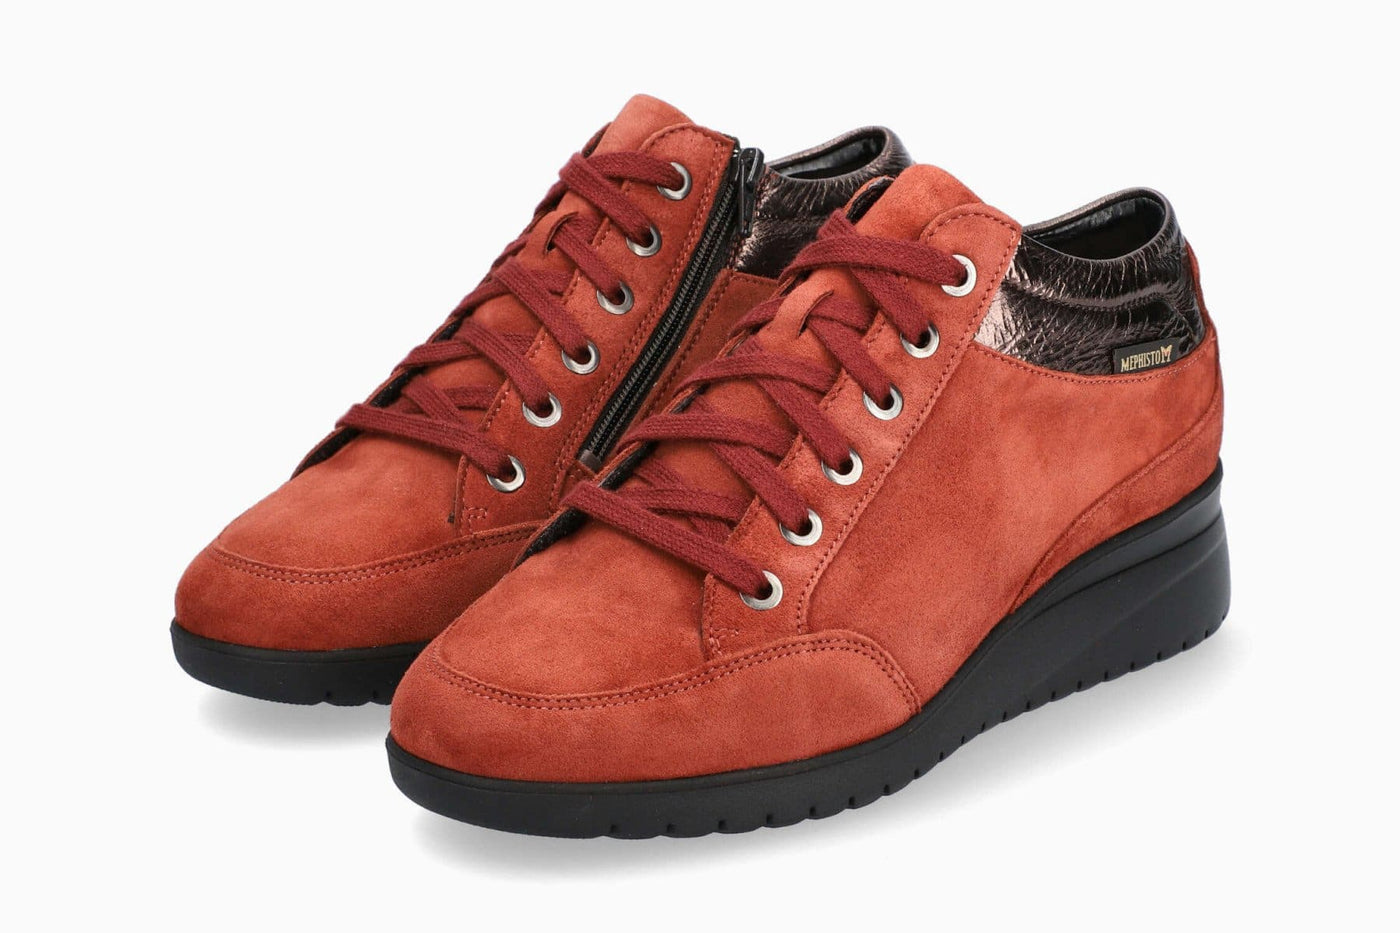 Mephisto Ianie | Chaussures confortables - Rouge / 3 - Chaussures à tirette dame